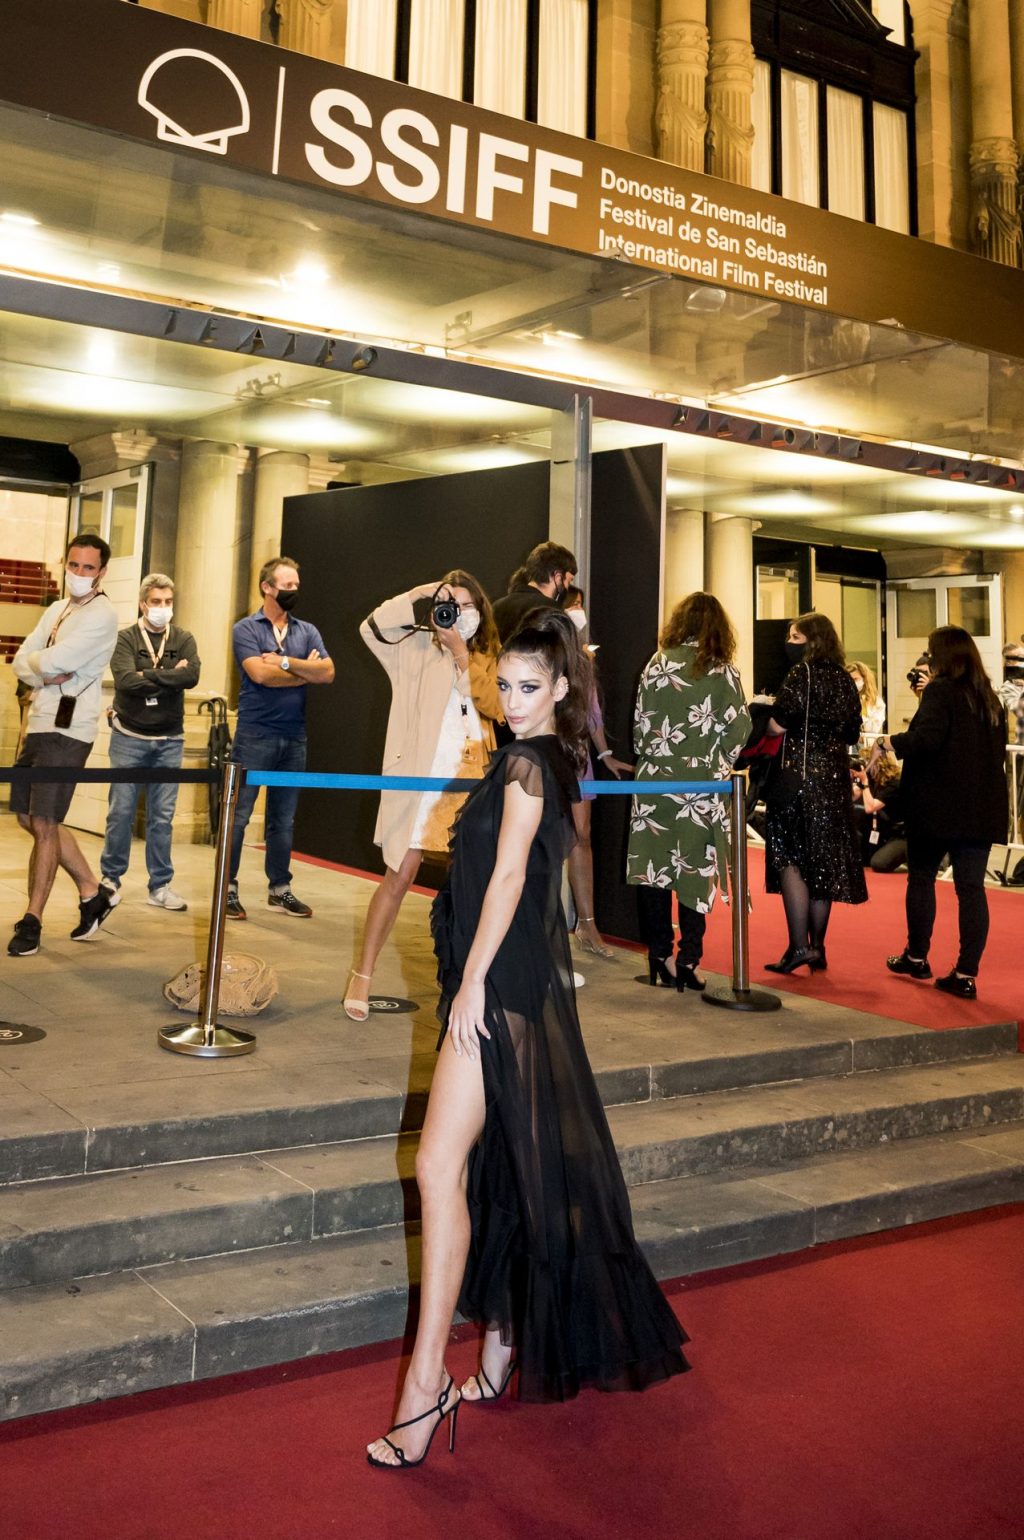 Maria Pedraza Shows Off Her Sexy Legs at the 68th SSIFF (19 Photos)